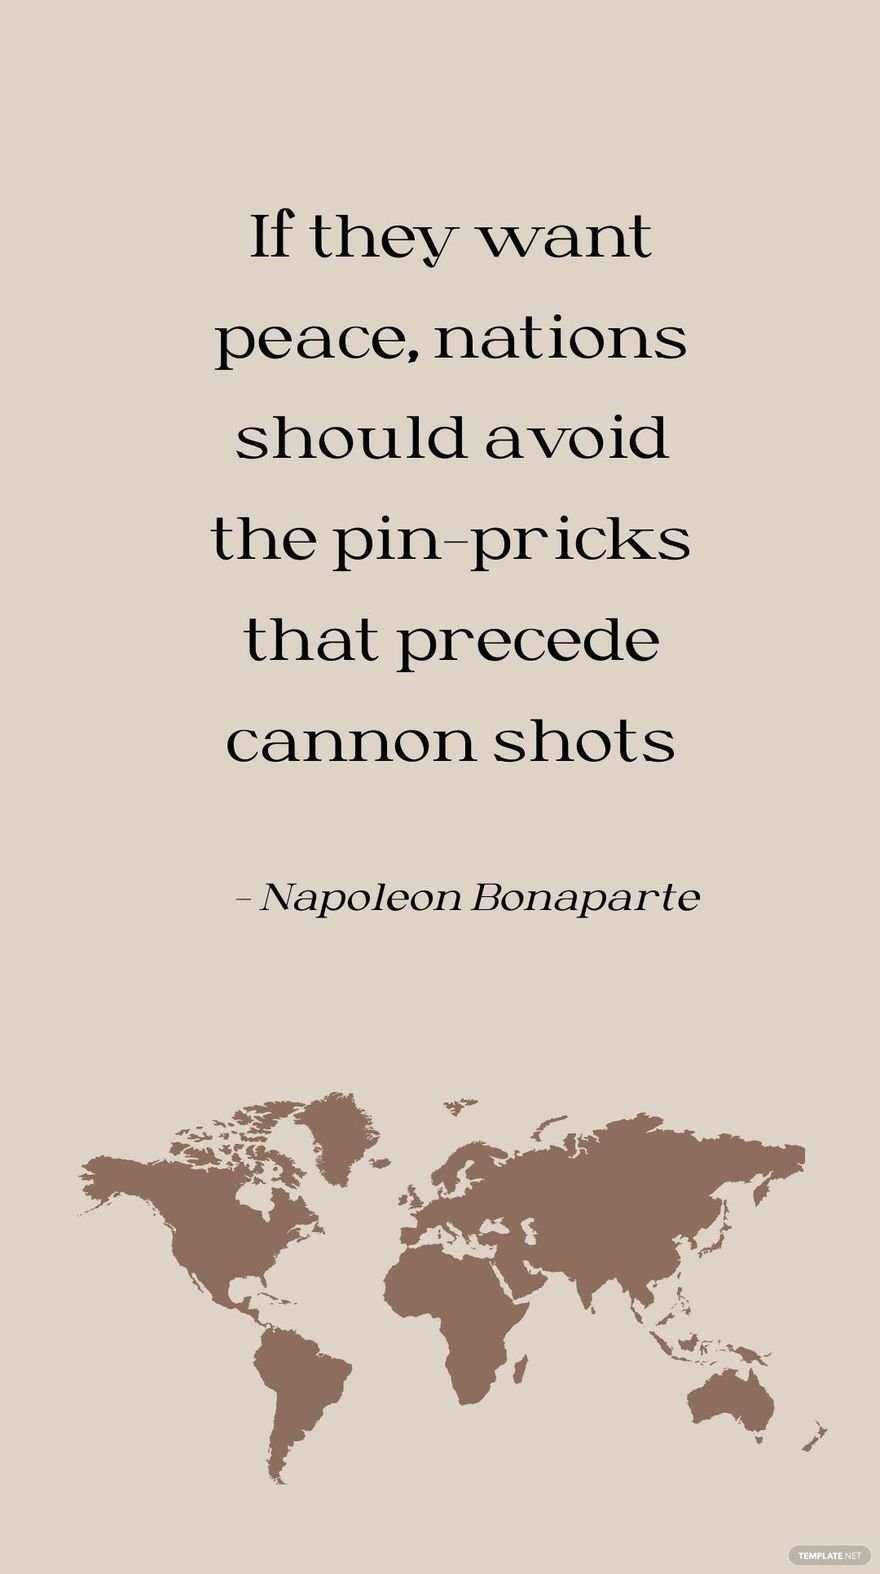 Napoleon Bonaparte - If they want peace, nations should avoid the pin-pricks that precede cannon shots in JPG